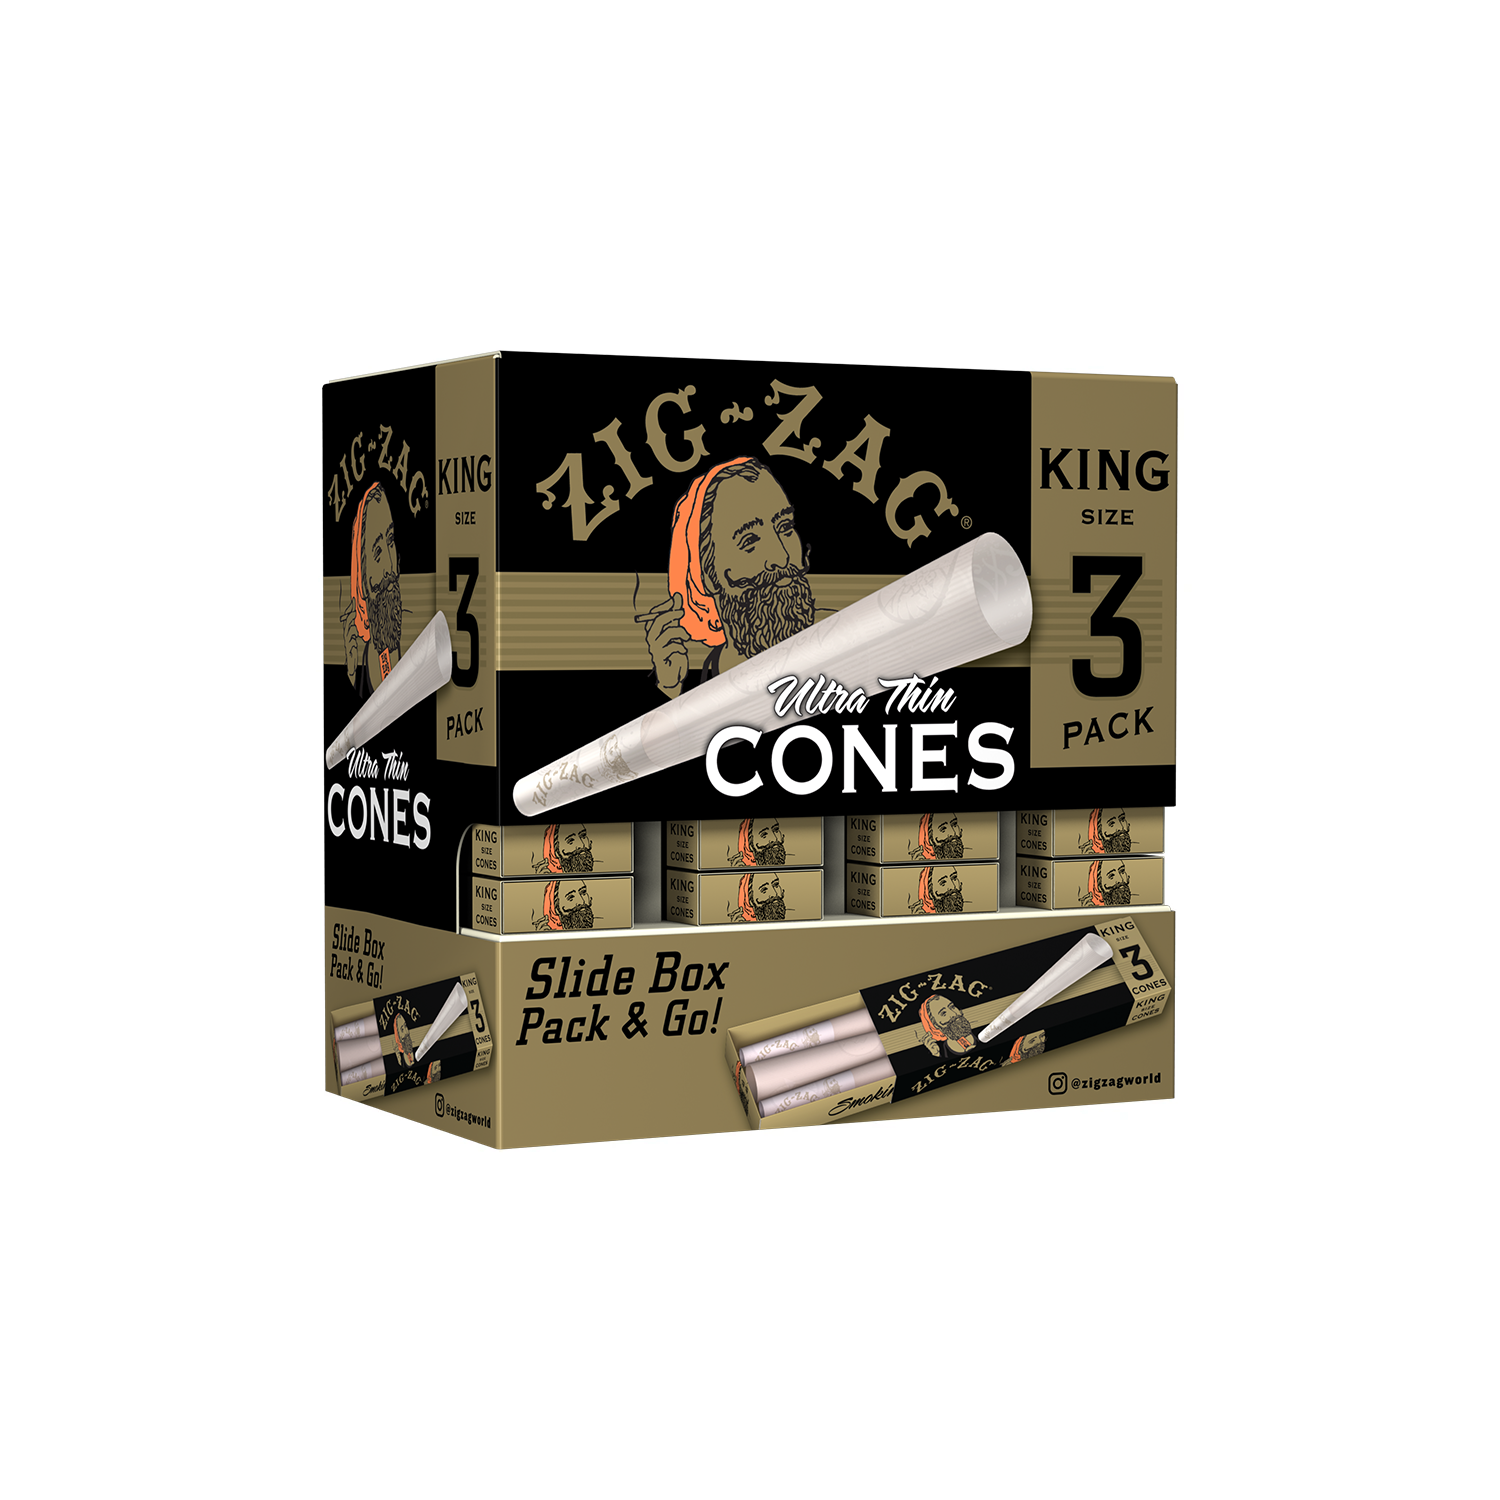 Promo Display (36 Pack) - King Size Cones